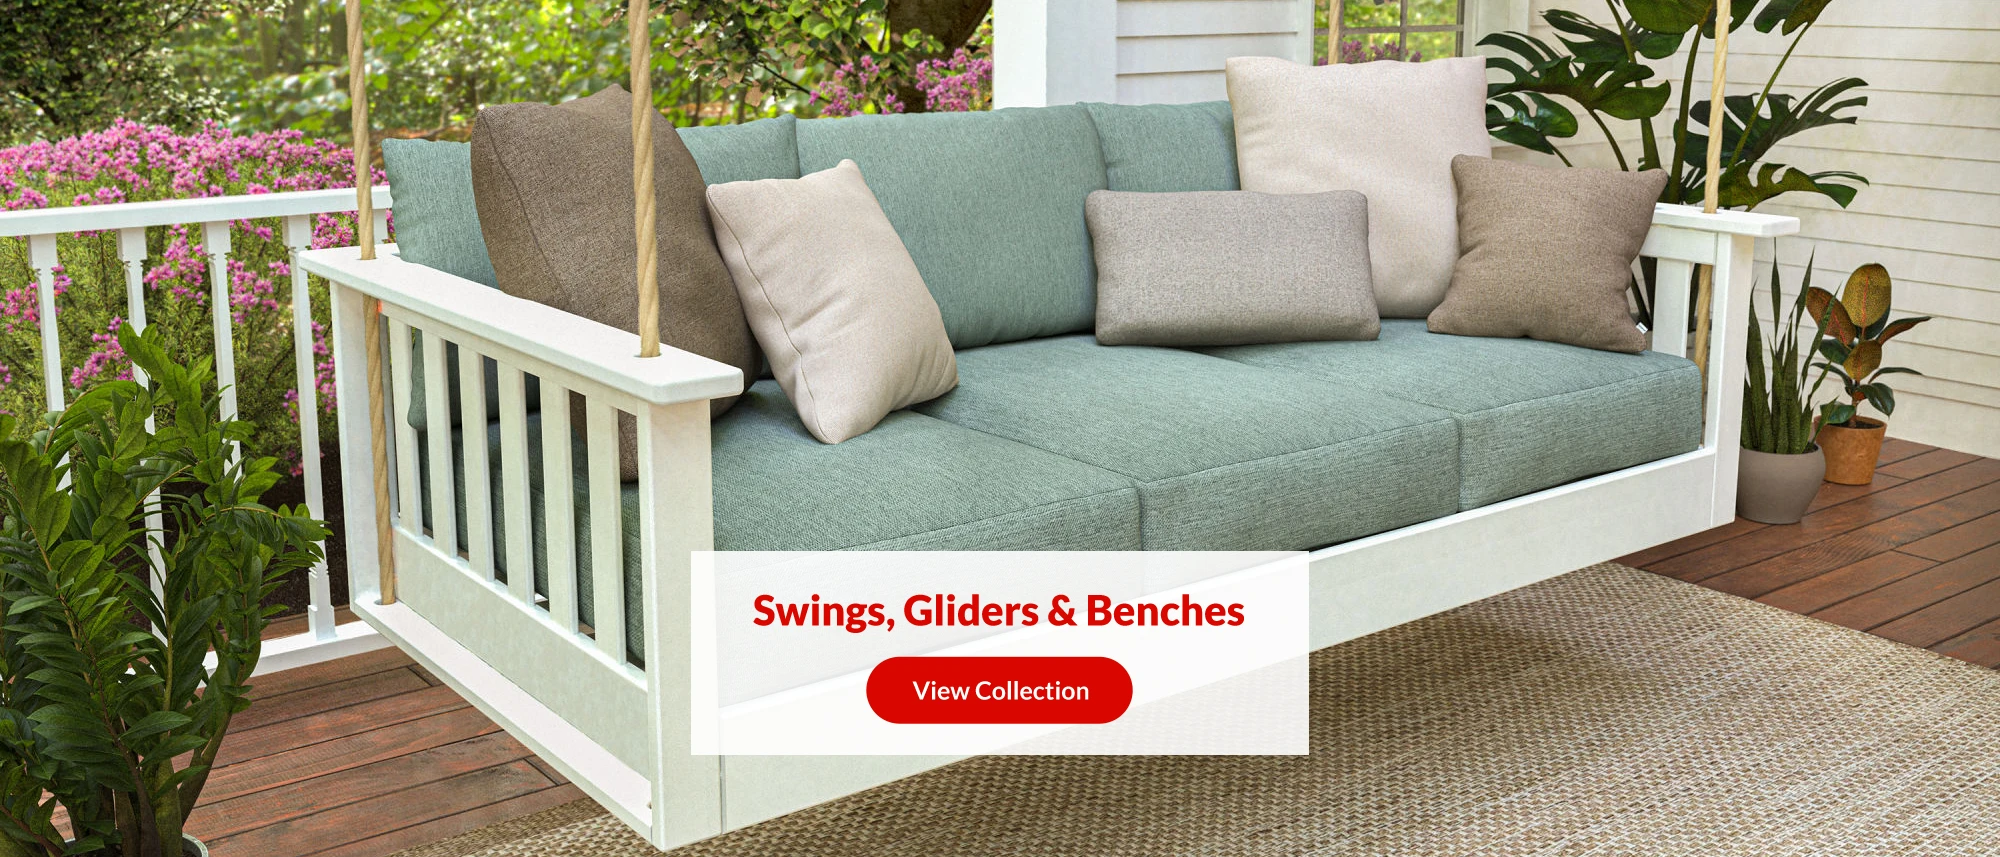 polywood main slider desktop 3 10 swings gliders benches